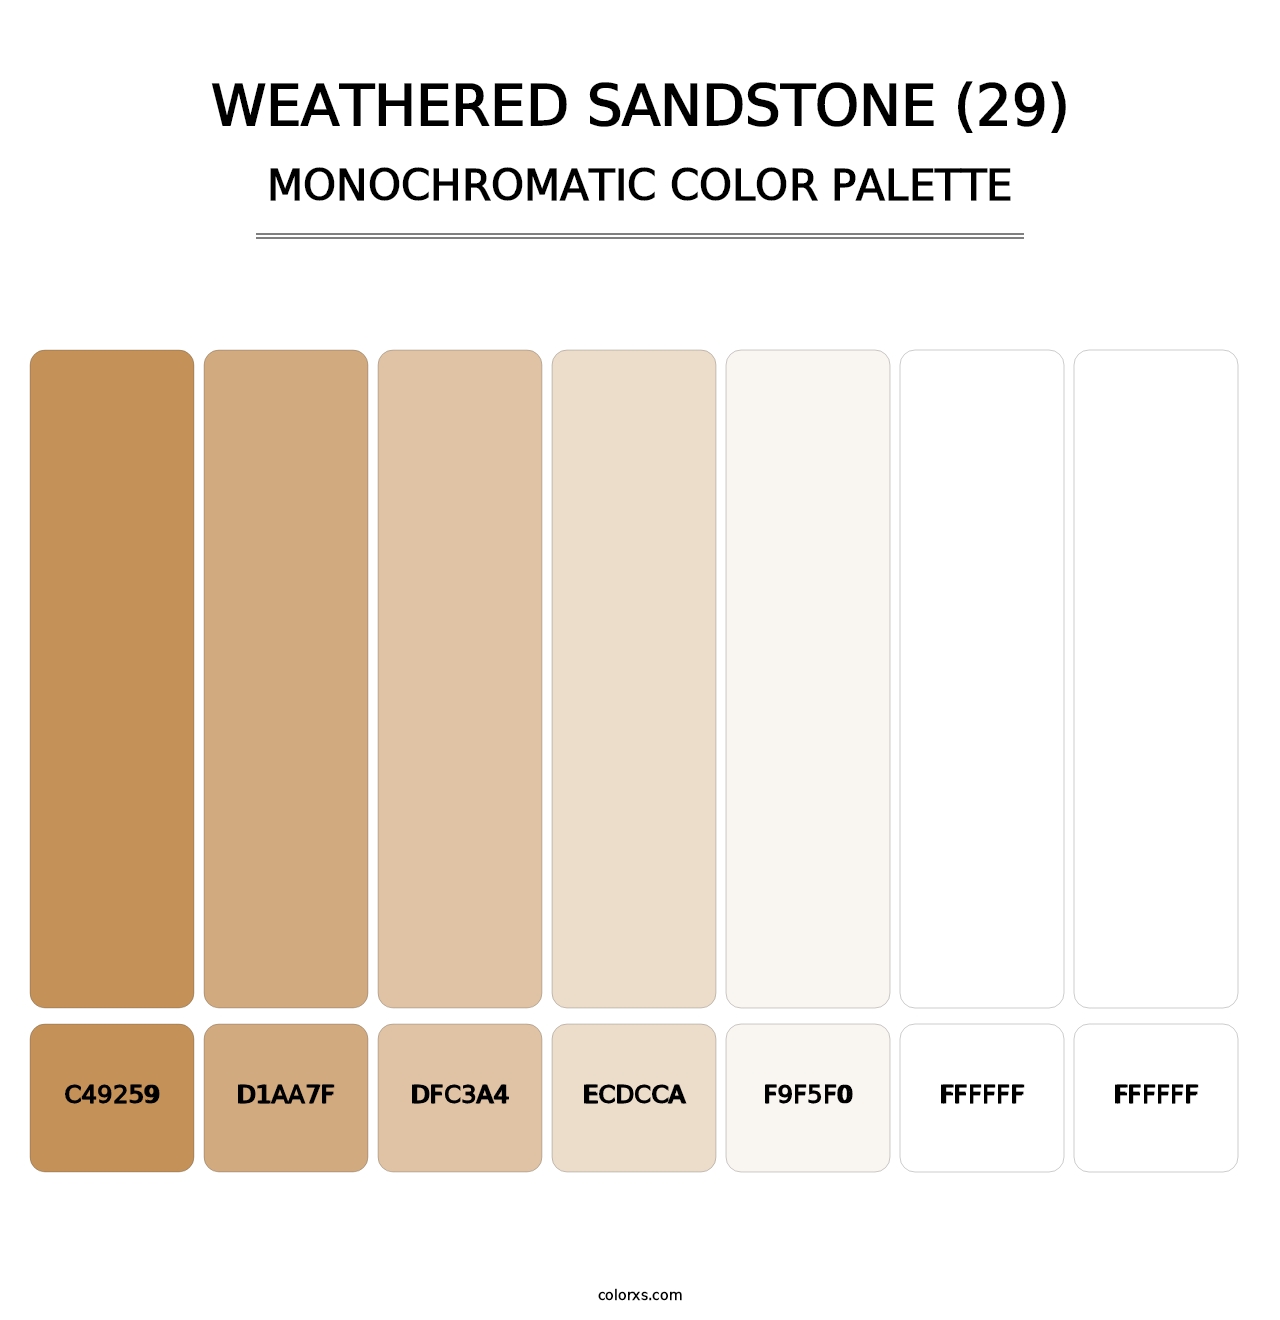 Weathered Sandstone (29) - Monochromatic Color Palette